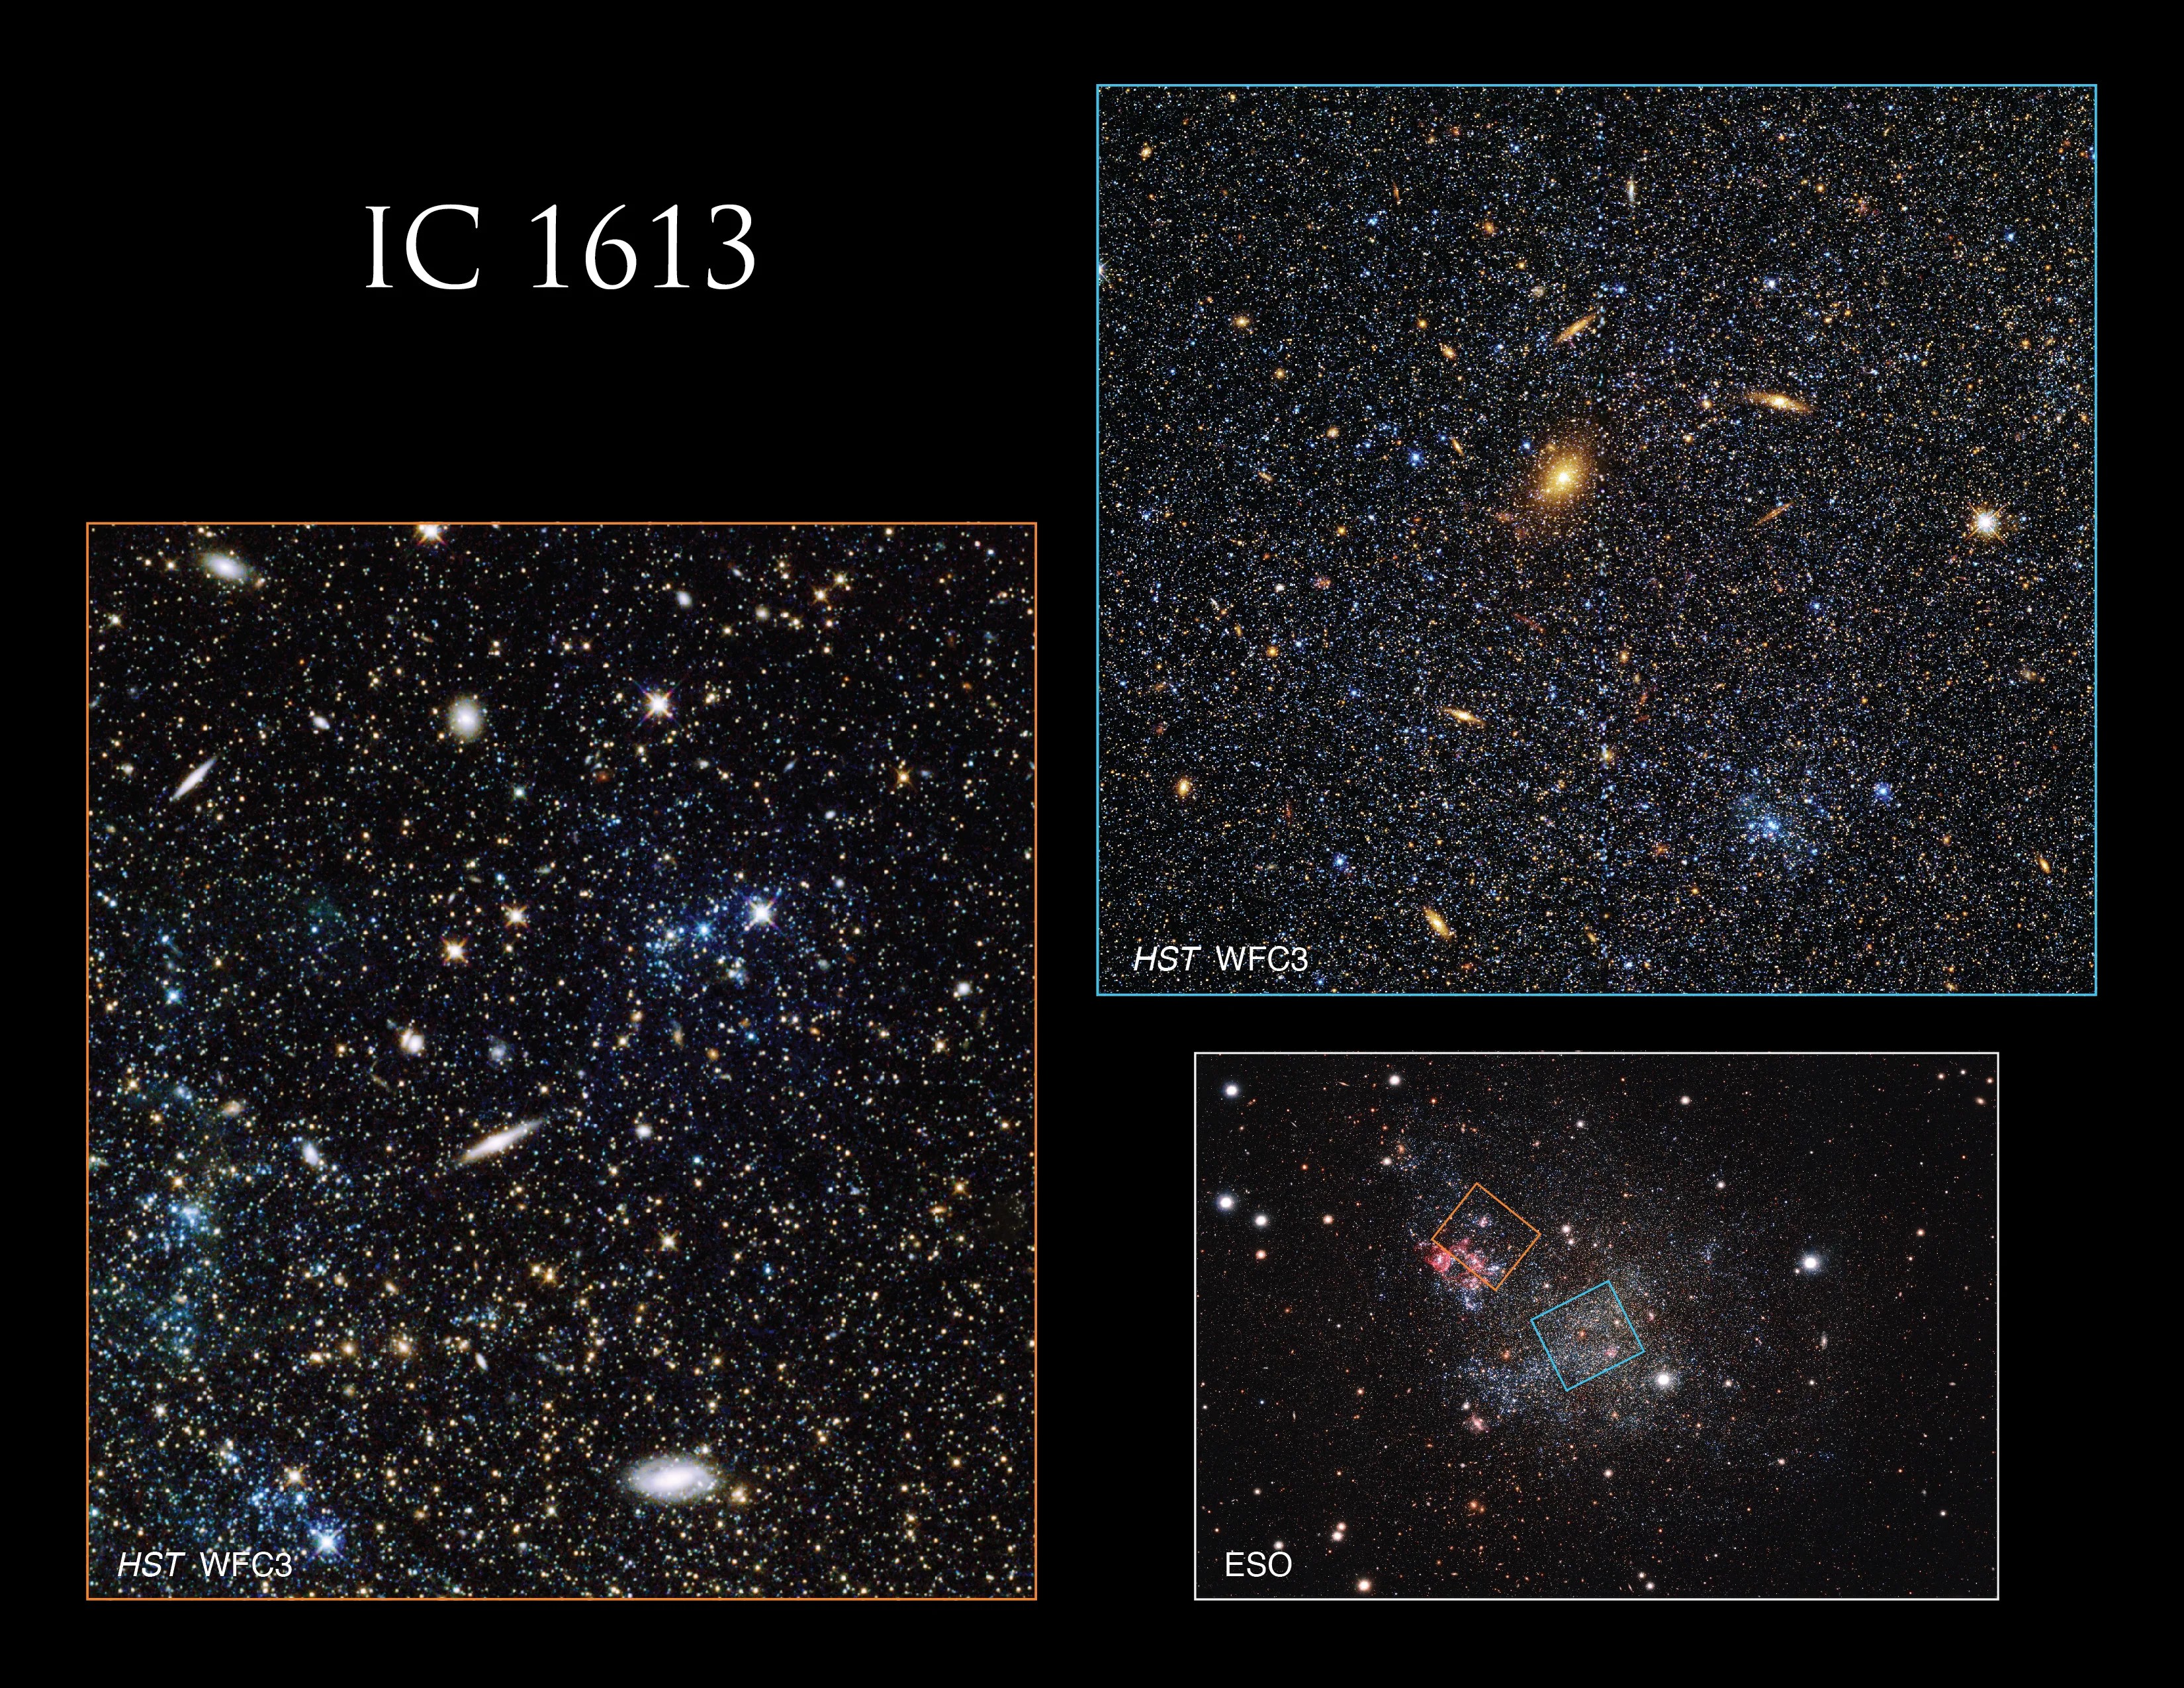 This context image shows two regions of Caldwell 51 (IC 1613) imaged by Hubble’s Wide Field Camera 3 (WFC3). The picture on the left is in infrared light and shows the outer edges of the galaxy, the one in the upper right observes its center, and the lower right image is a wide-field image taken by a ground-based telescope.